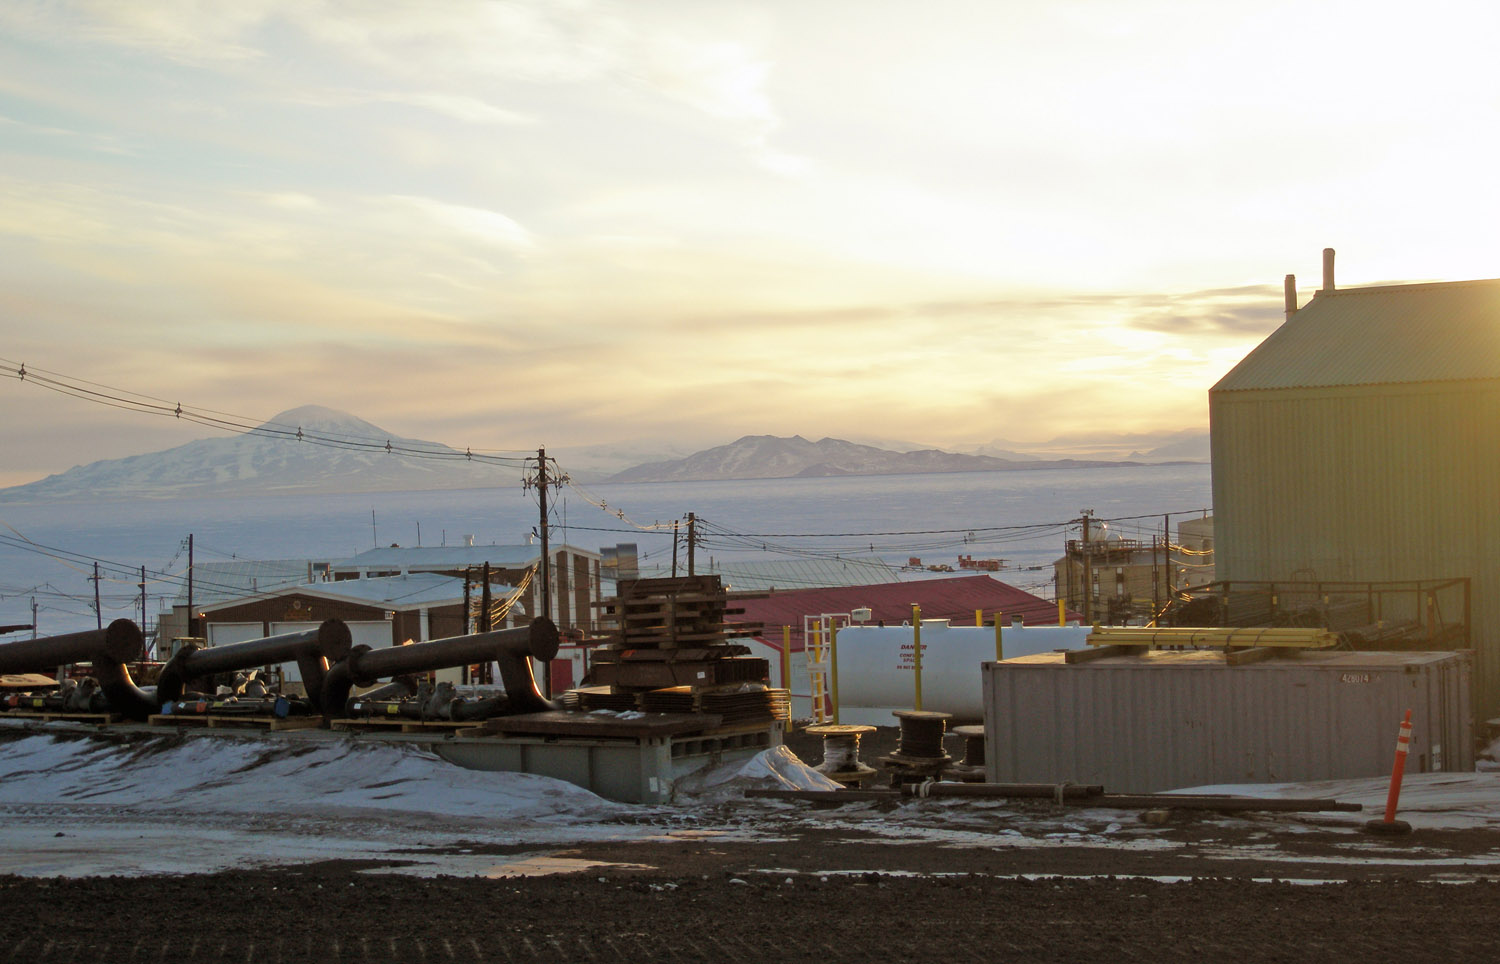 Evening (sort of) at McMurdo